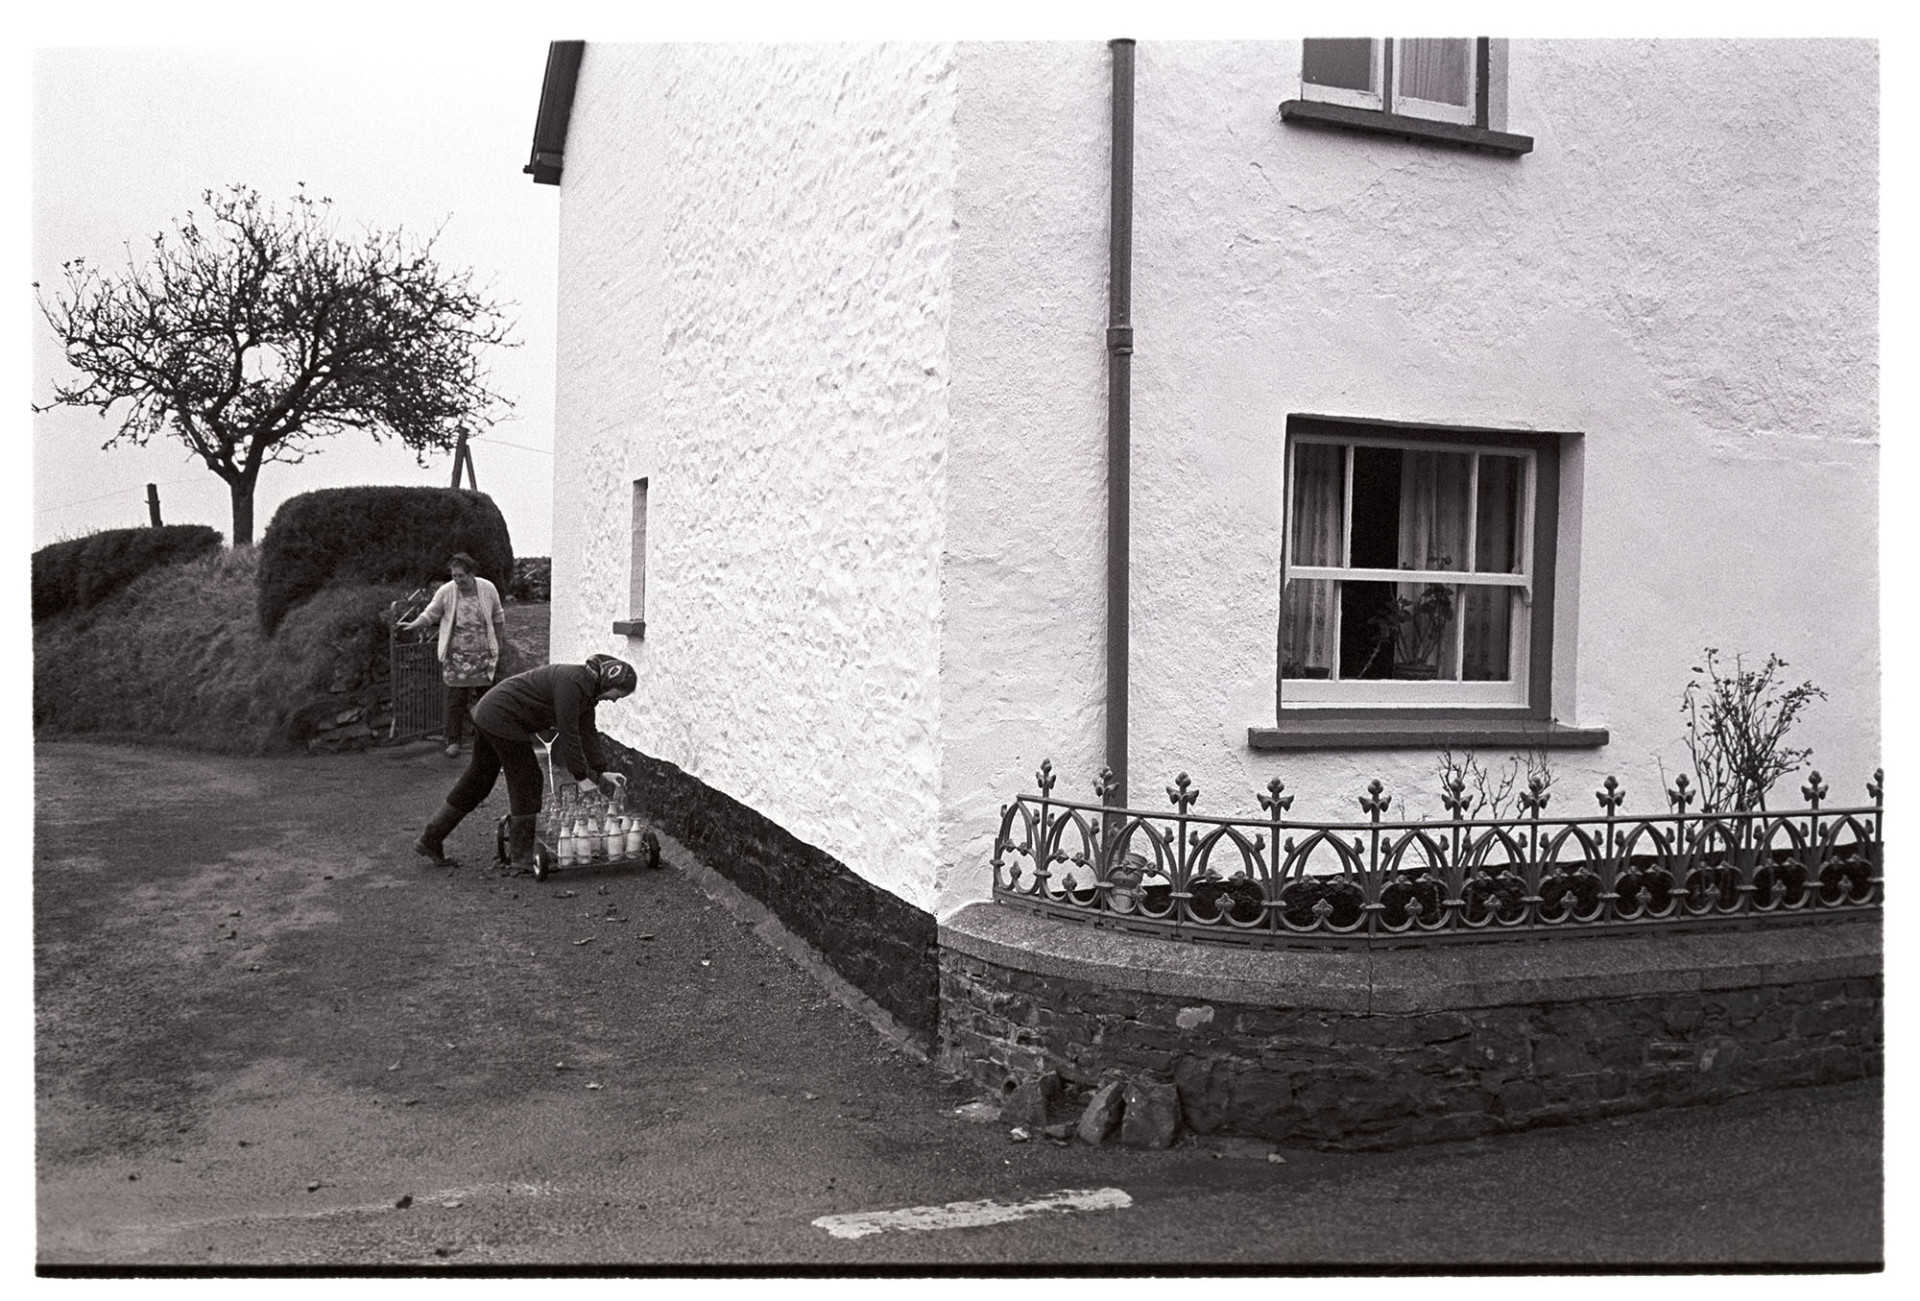 Woman delivering milk at house in village with iron railings.<br />
[Jane Woolacott delivering milk from a trolley in Atherington. She is standing beside a house with wrought iron railings.  In the background another woman is emerging from a garden gate.]